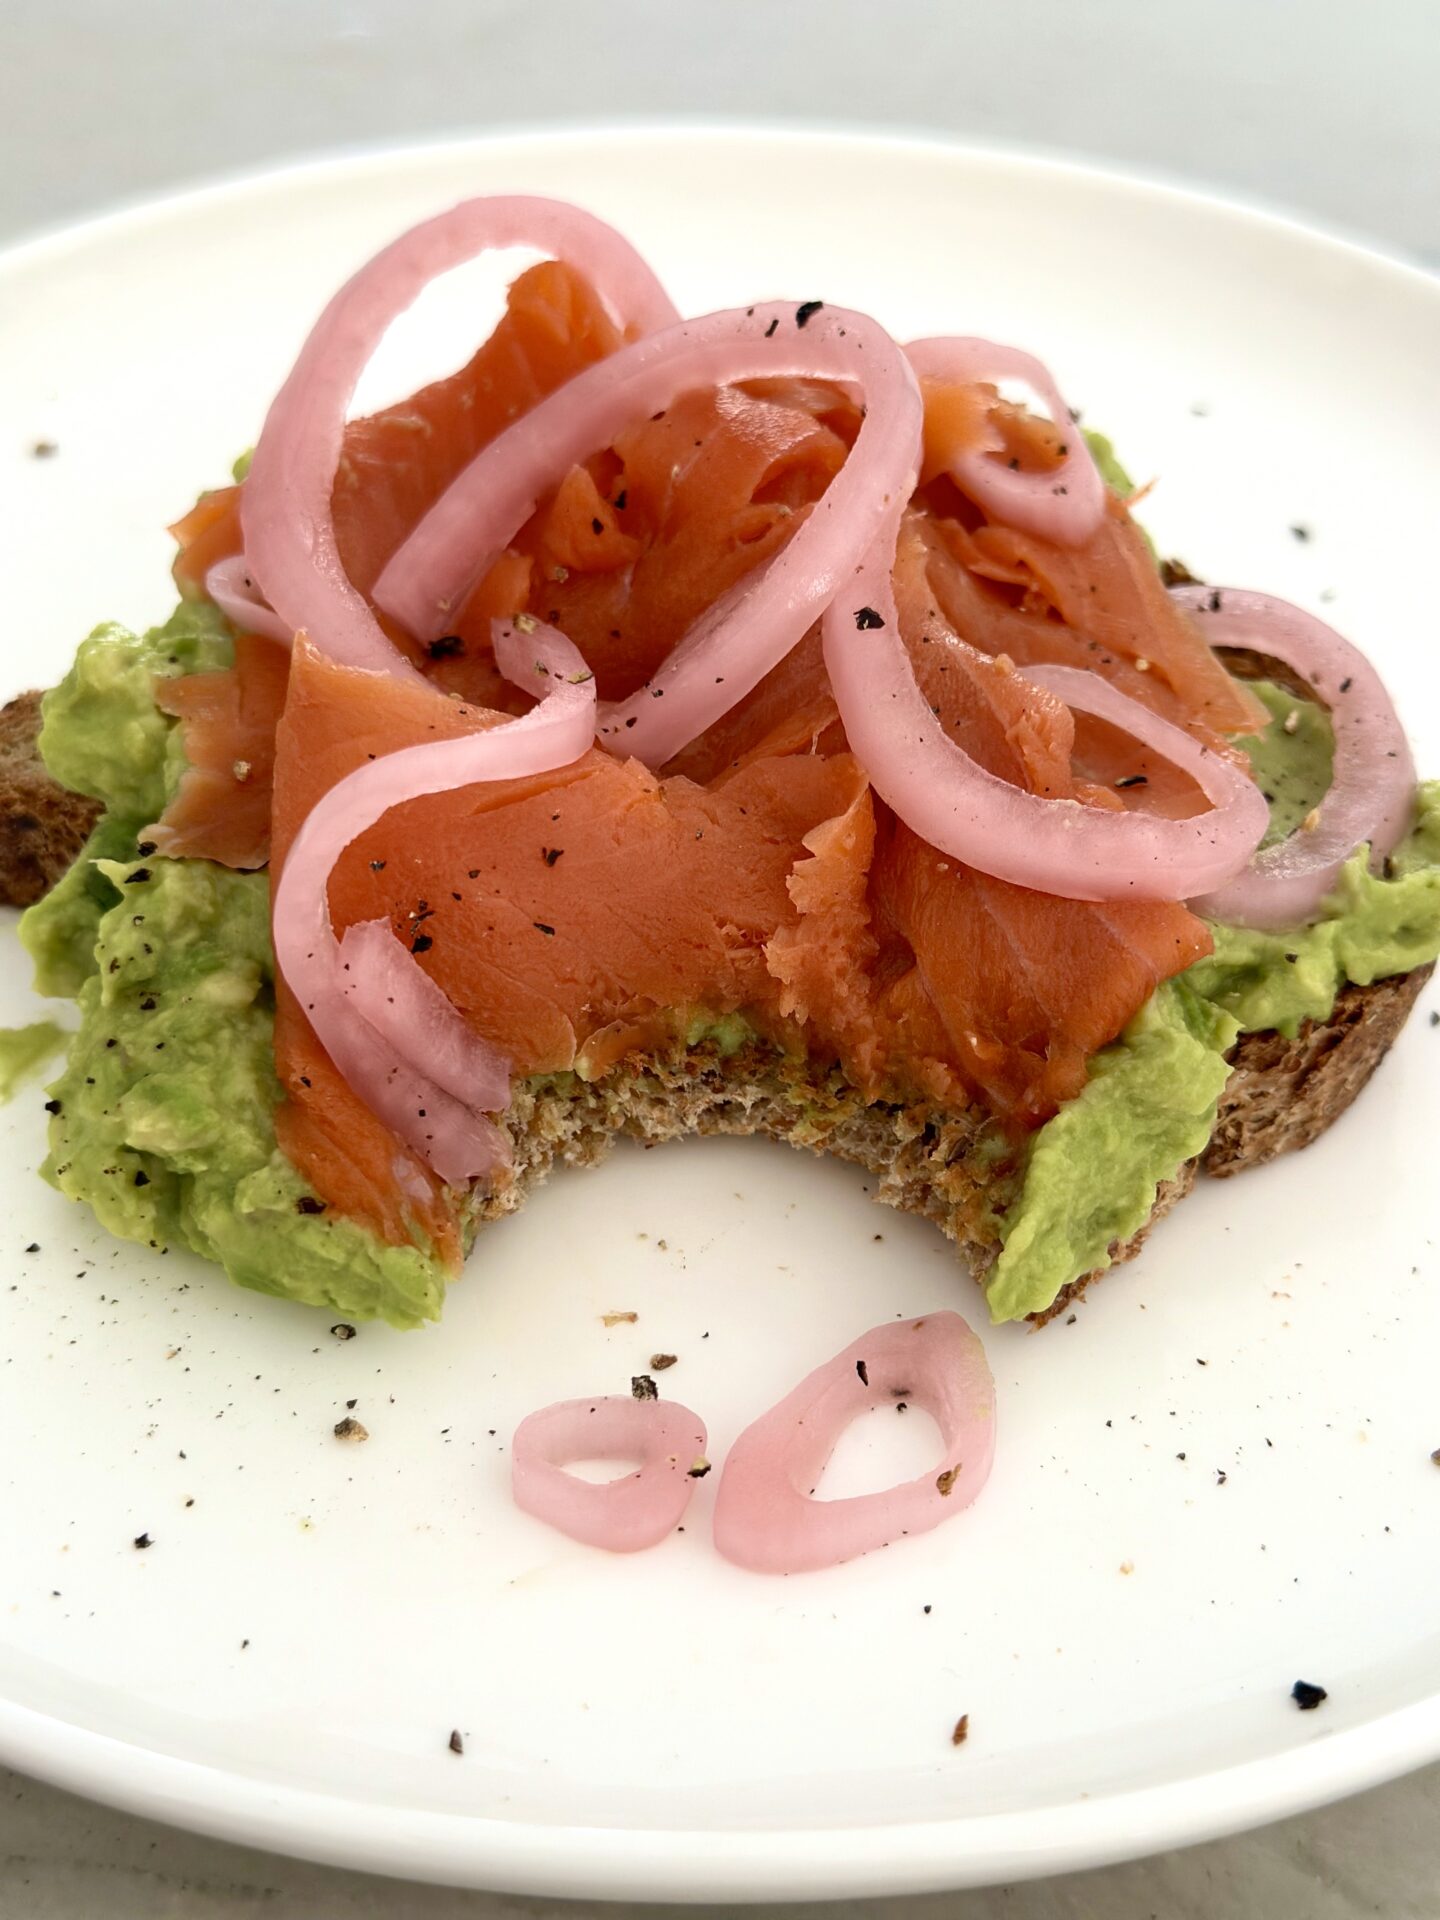 Avocado toast with smoked salmon and pickled red onions sits on a white plate.  A large bite has been taken out of the avocado toast